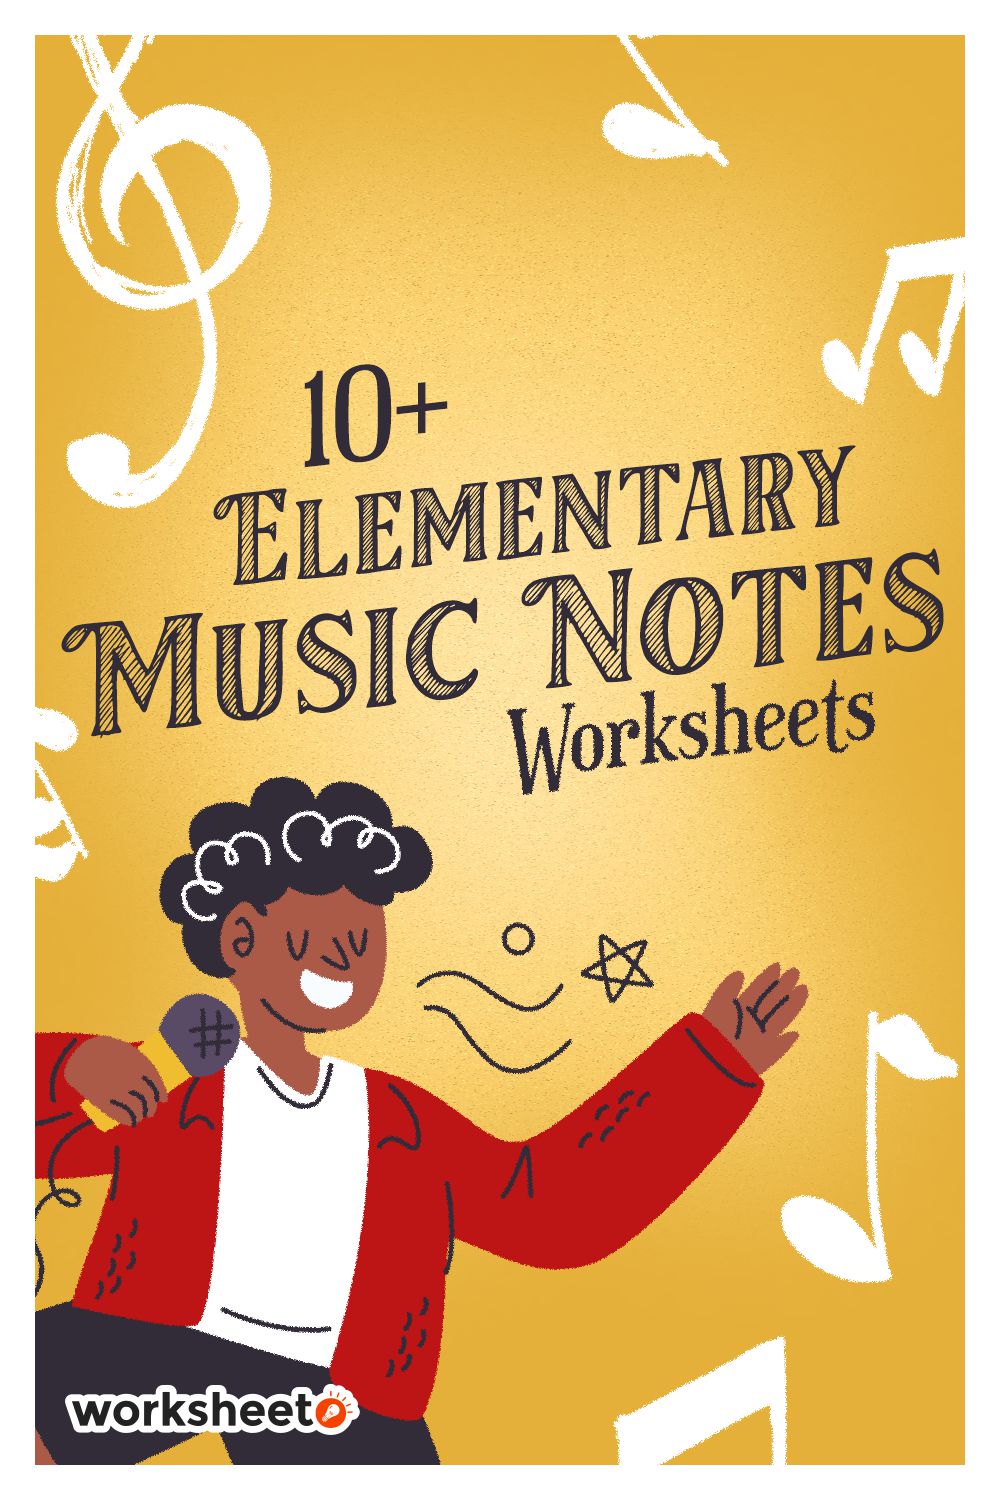 17 Images of Elementary Music Note Worksheet